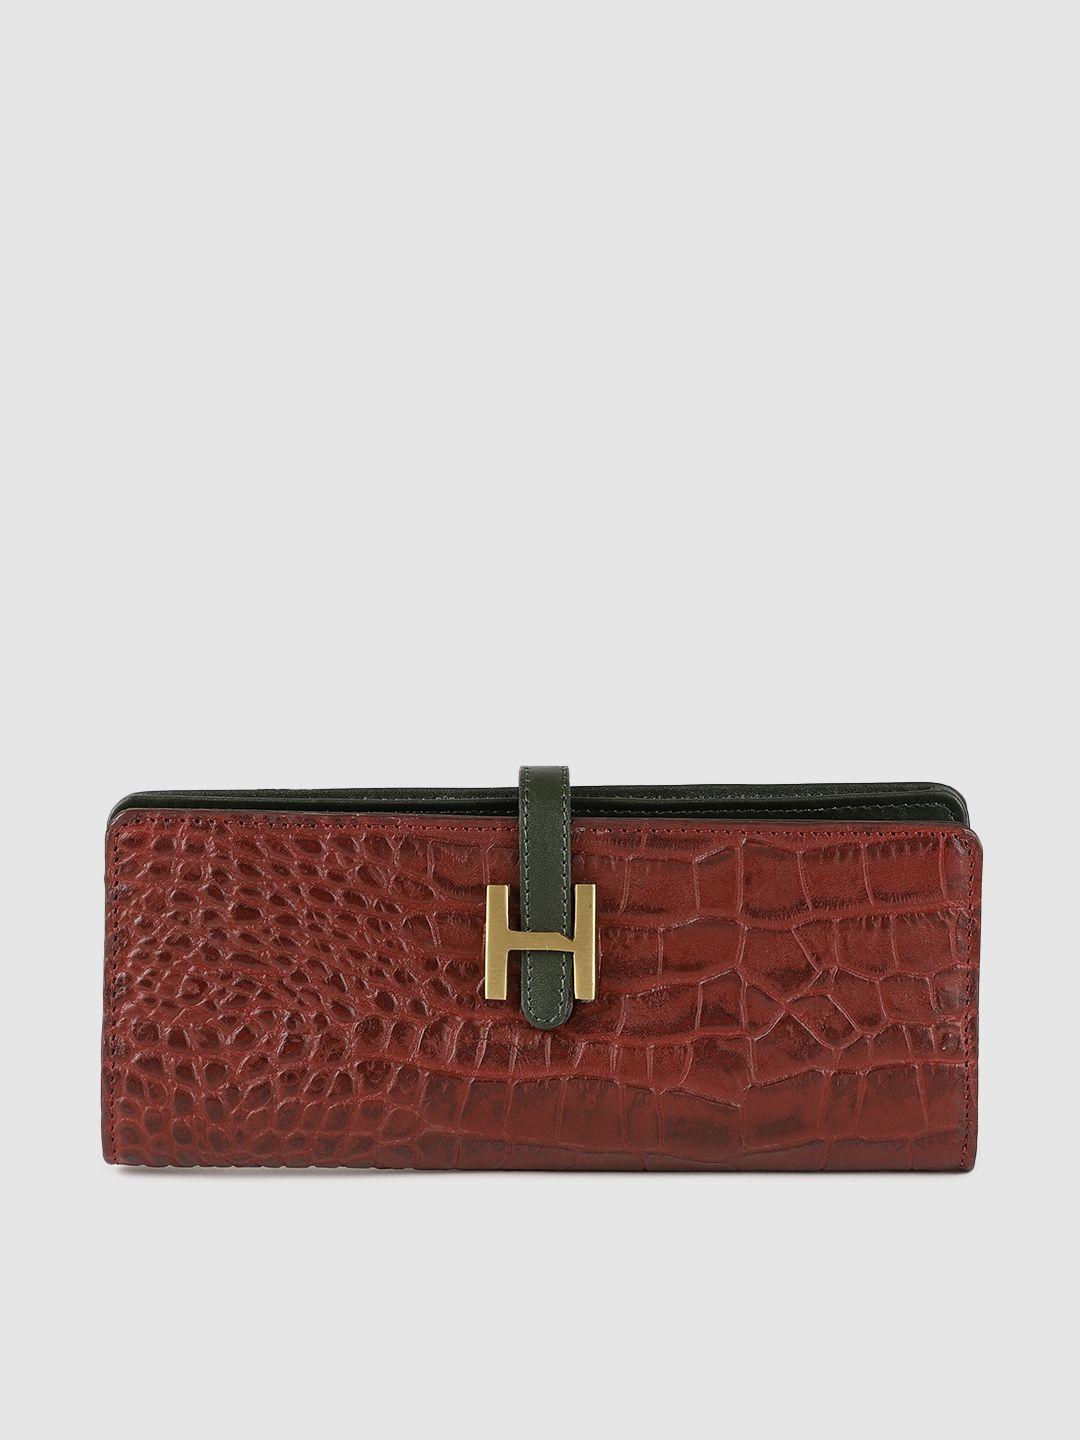 hidesign women rust red textured two fold leather wallet